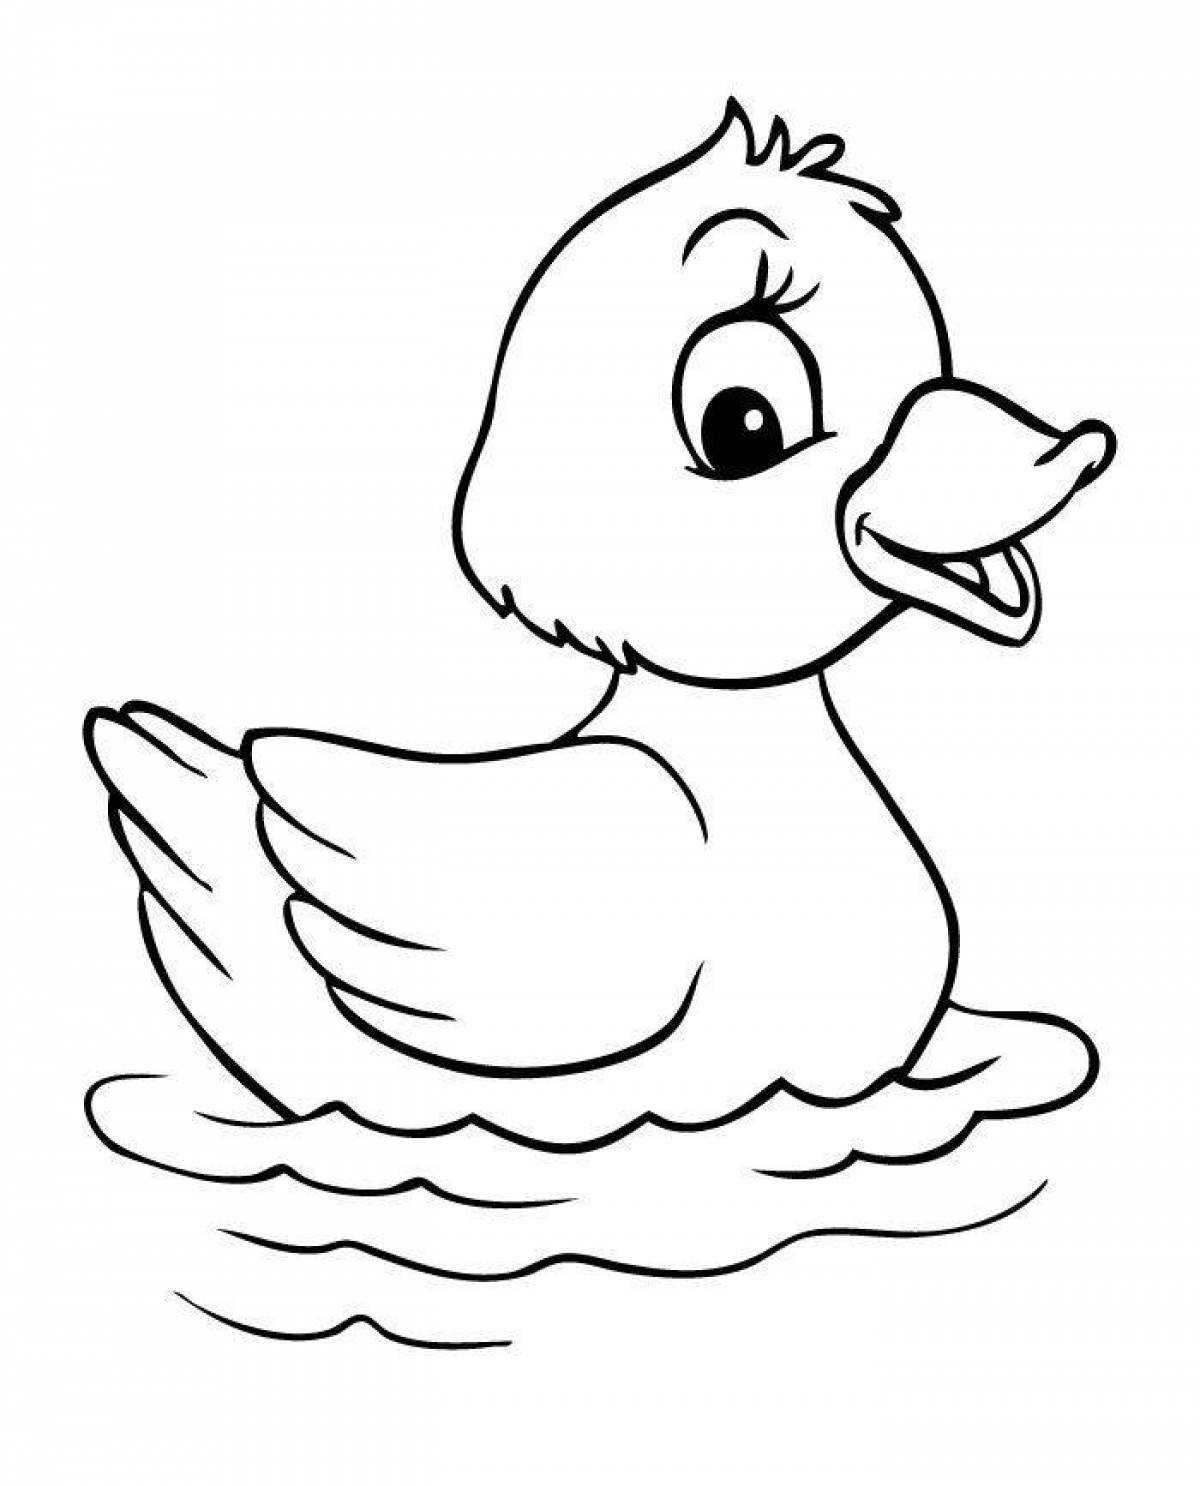 Coloring funny duckling for kids